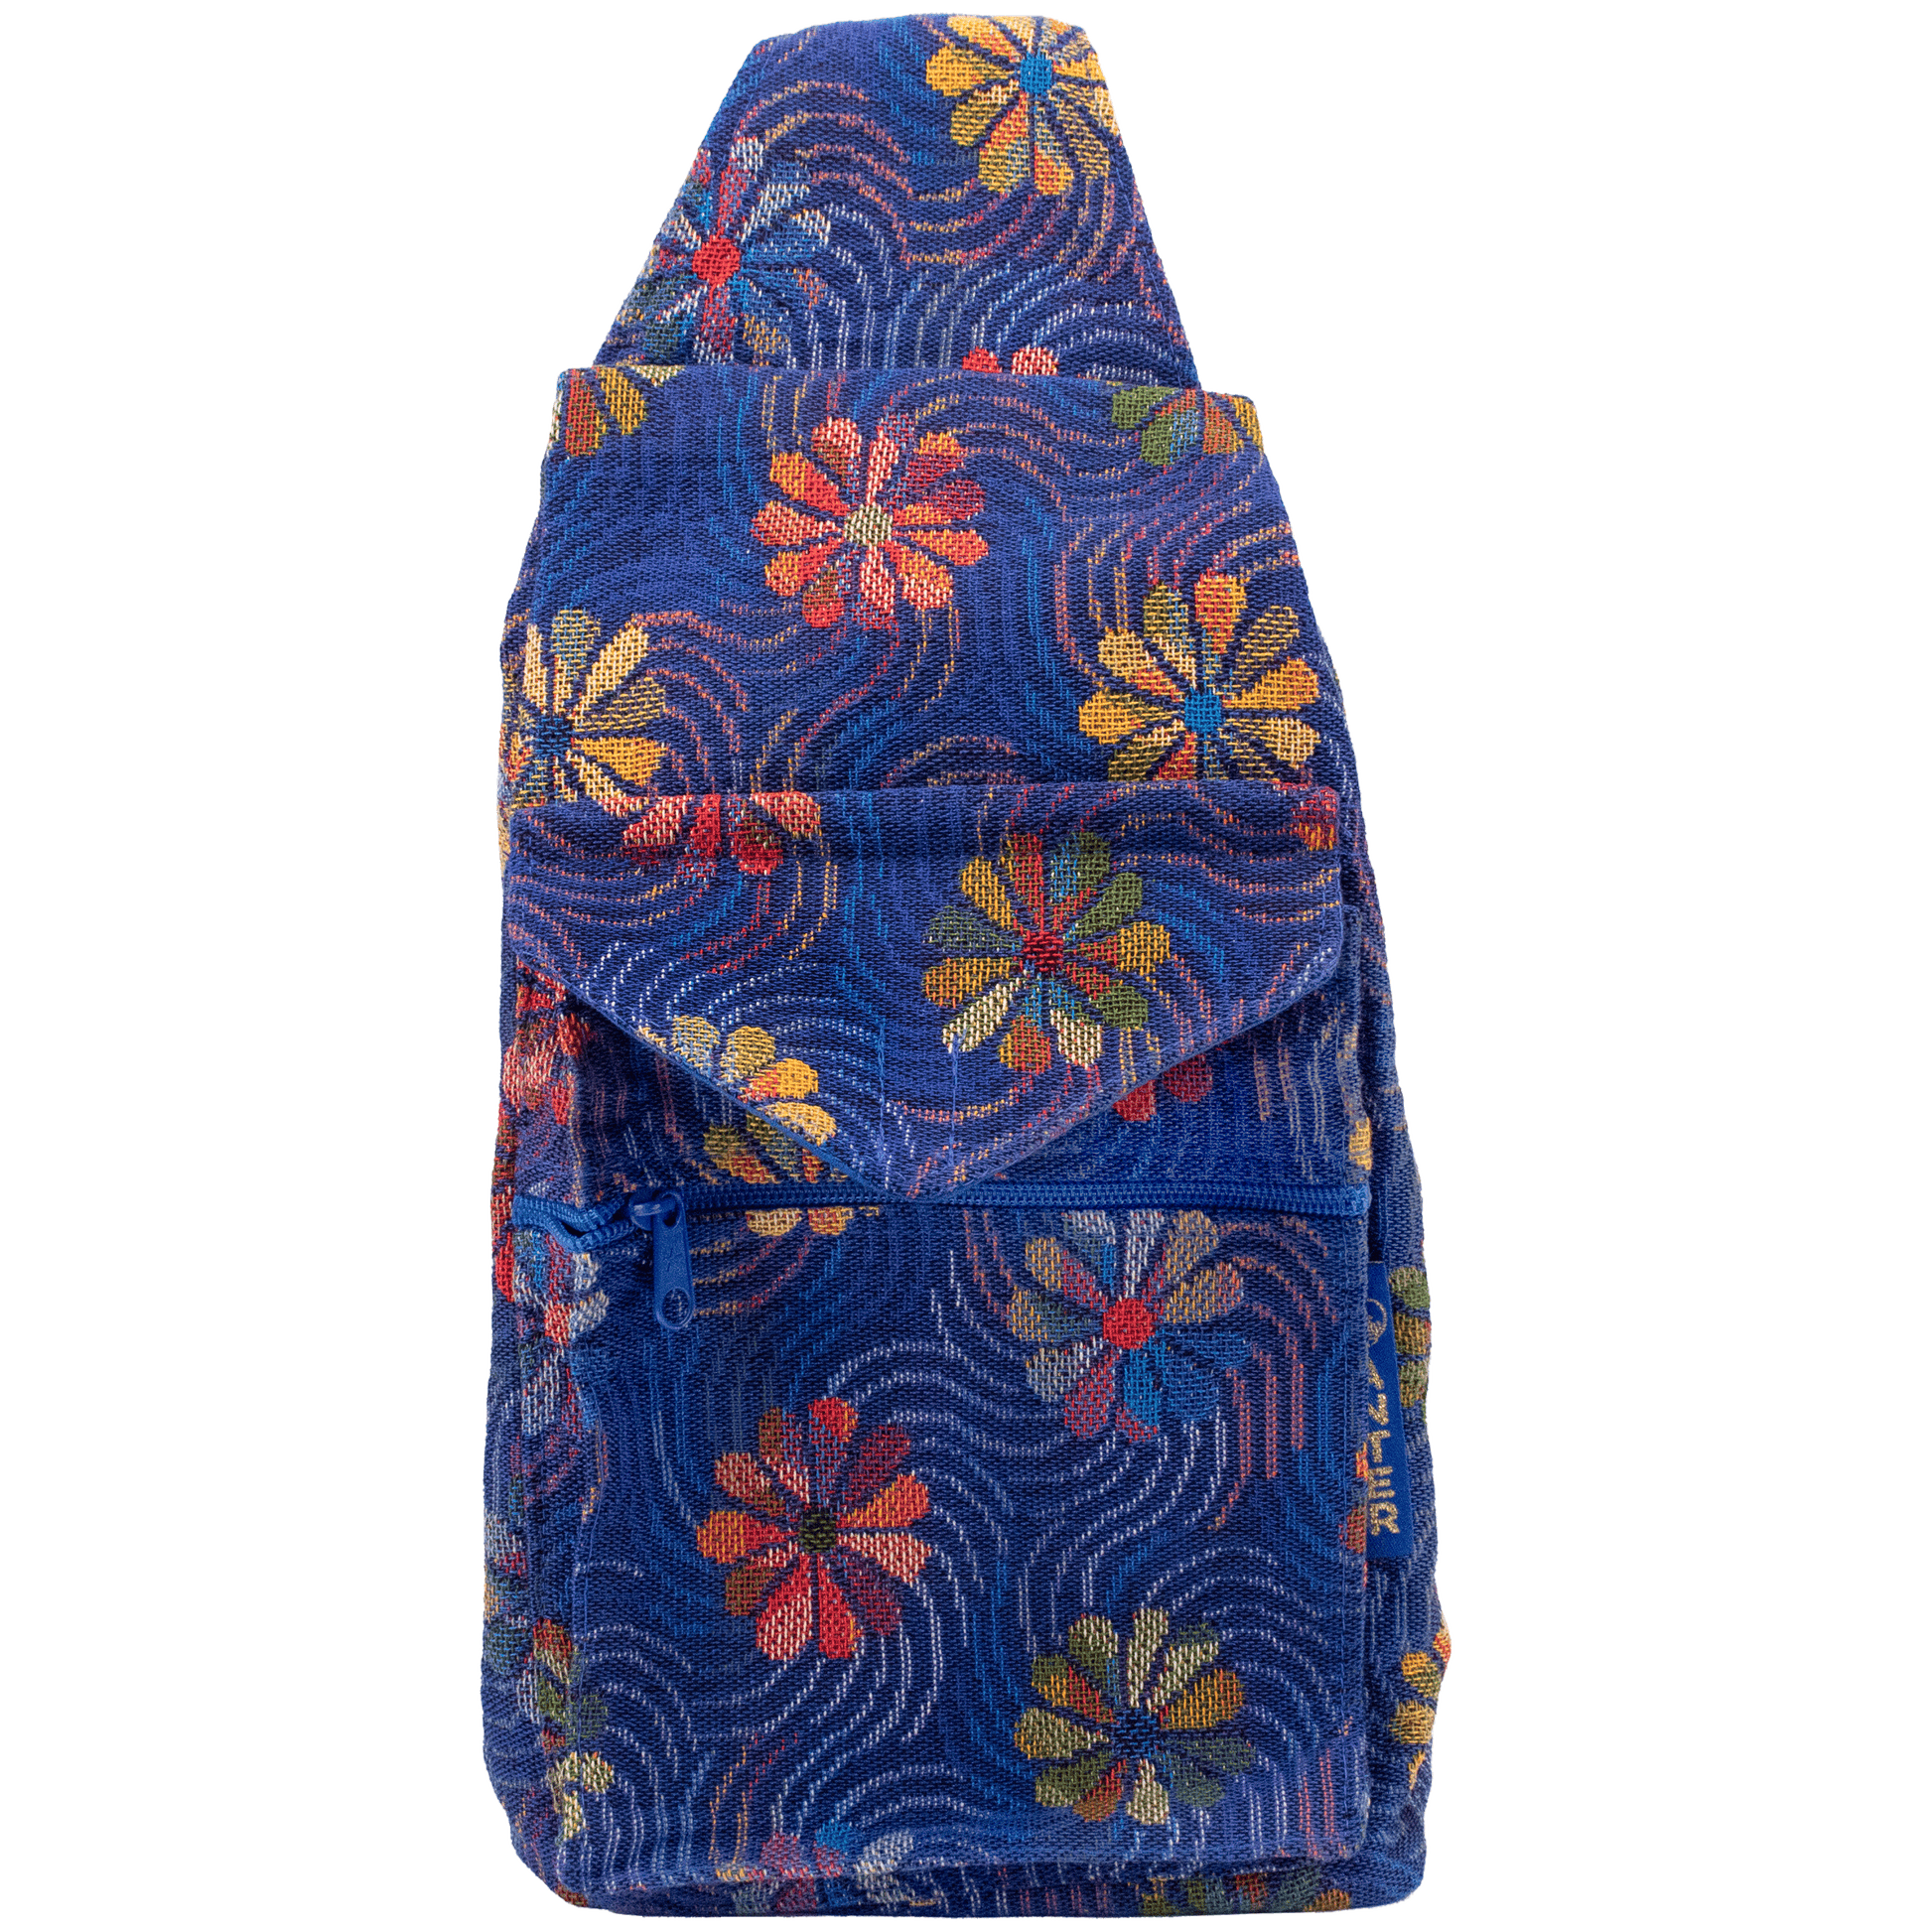 Convertible backpack shoulder bag blue with rainbow whimsical daisy pattern